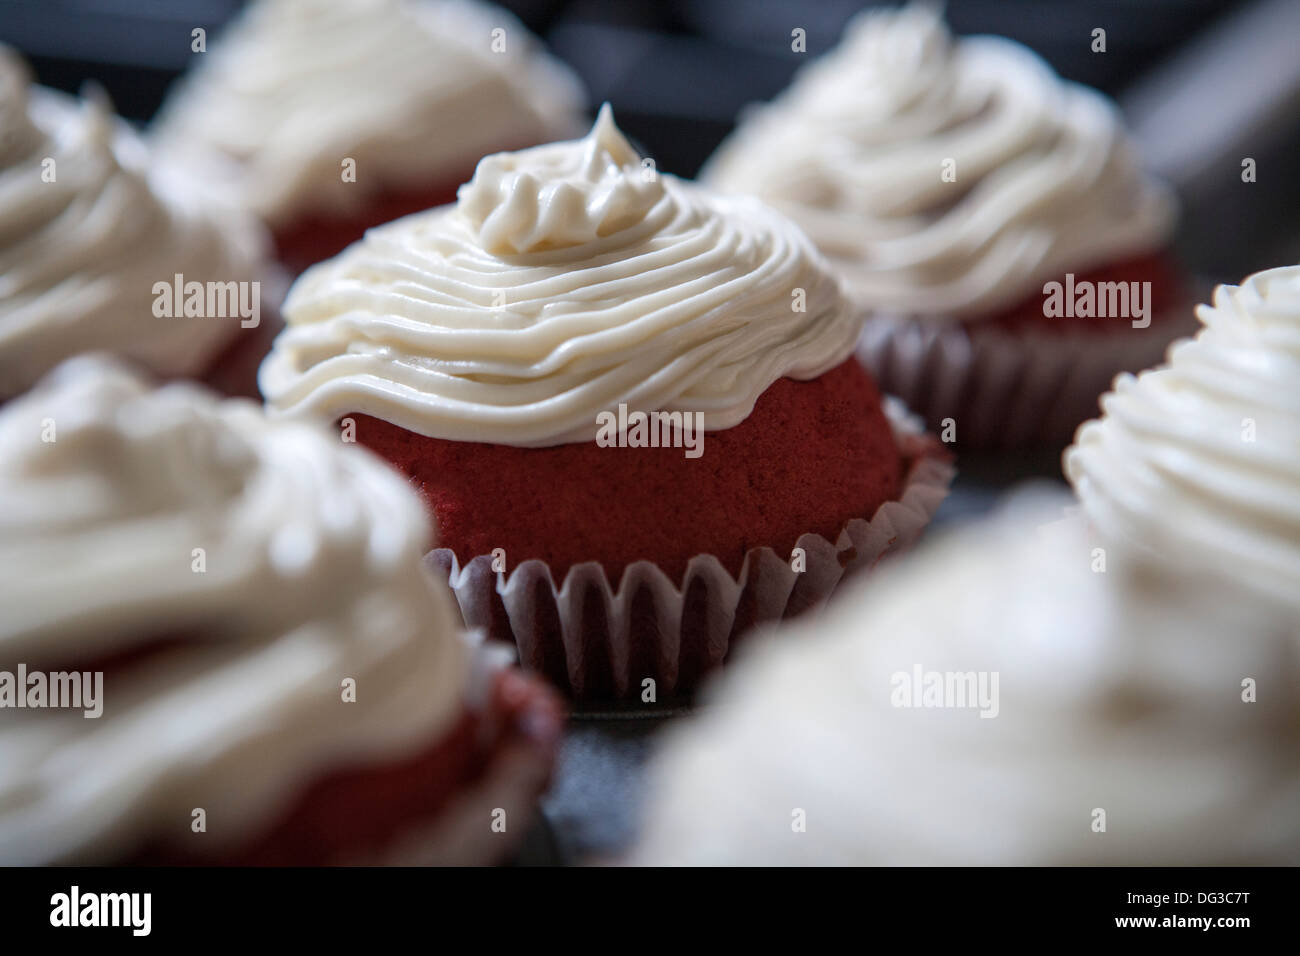 Red Velvet Cupcakes with Cream Cheese Icing, Close-Up Stock Photo